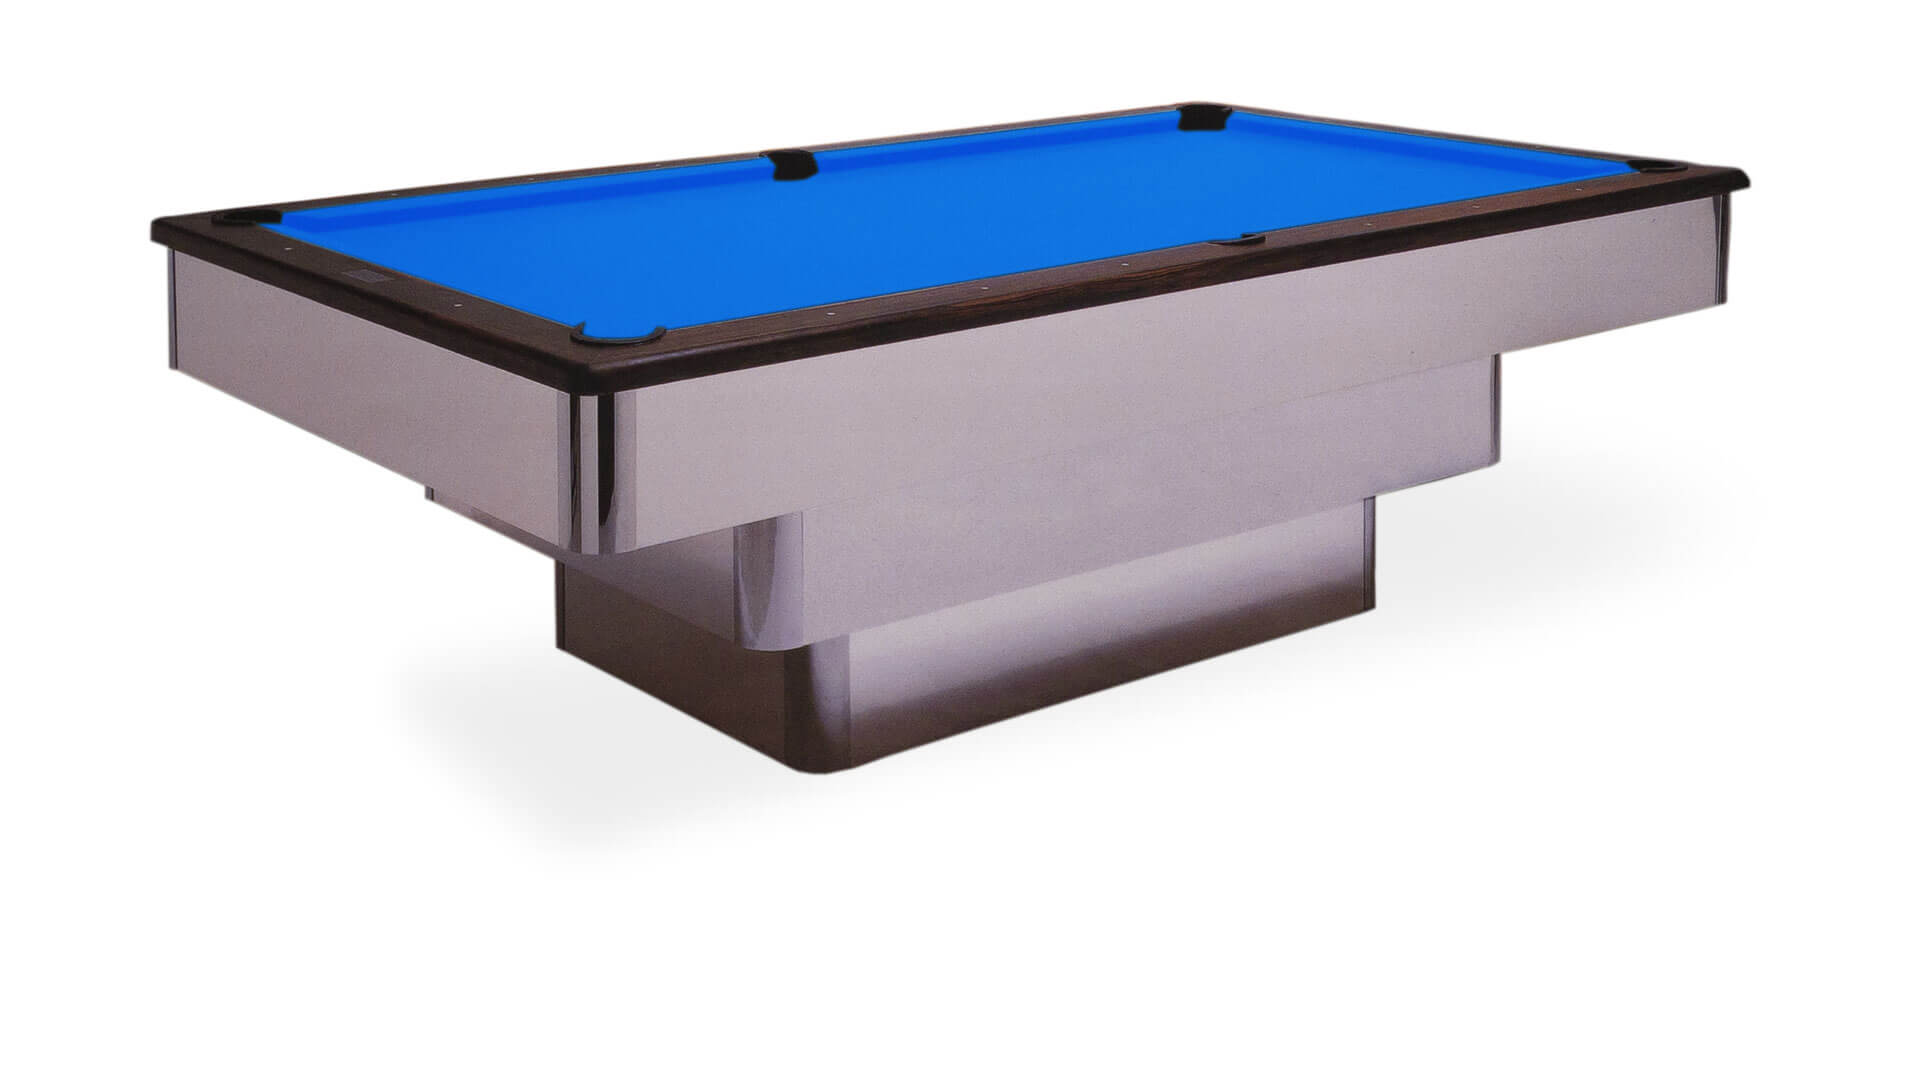 14+ Pool Table With Tabletop